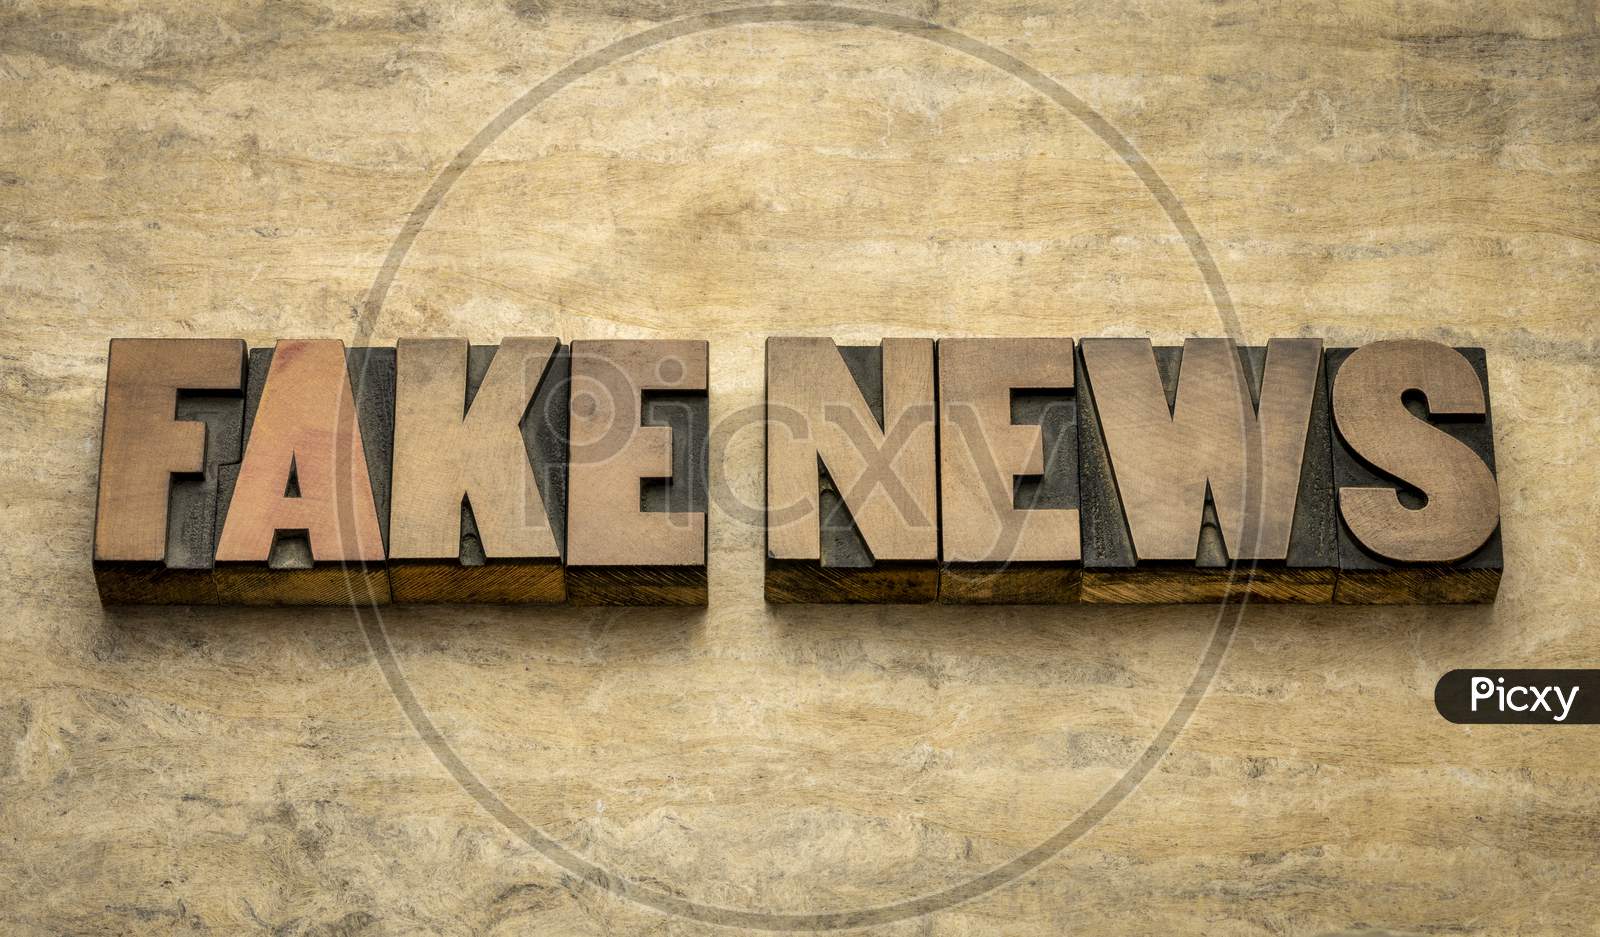 Fake News Word Abstract In Vintage Letterpress Wood Type Against Grunge Paper, Social Media And Infodemic Concept